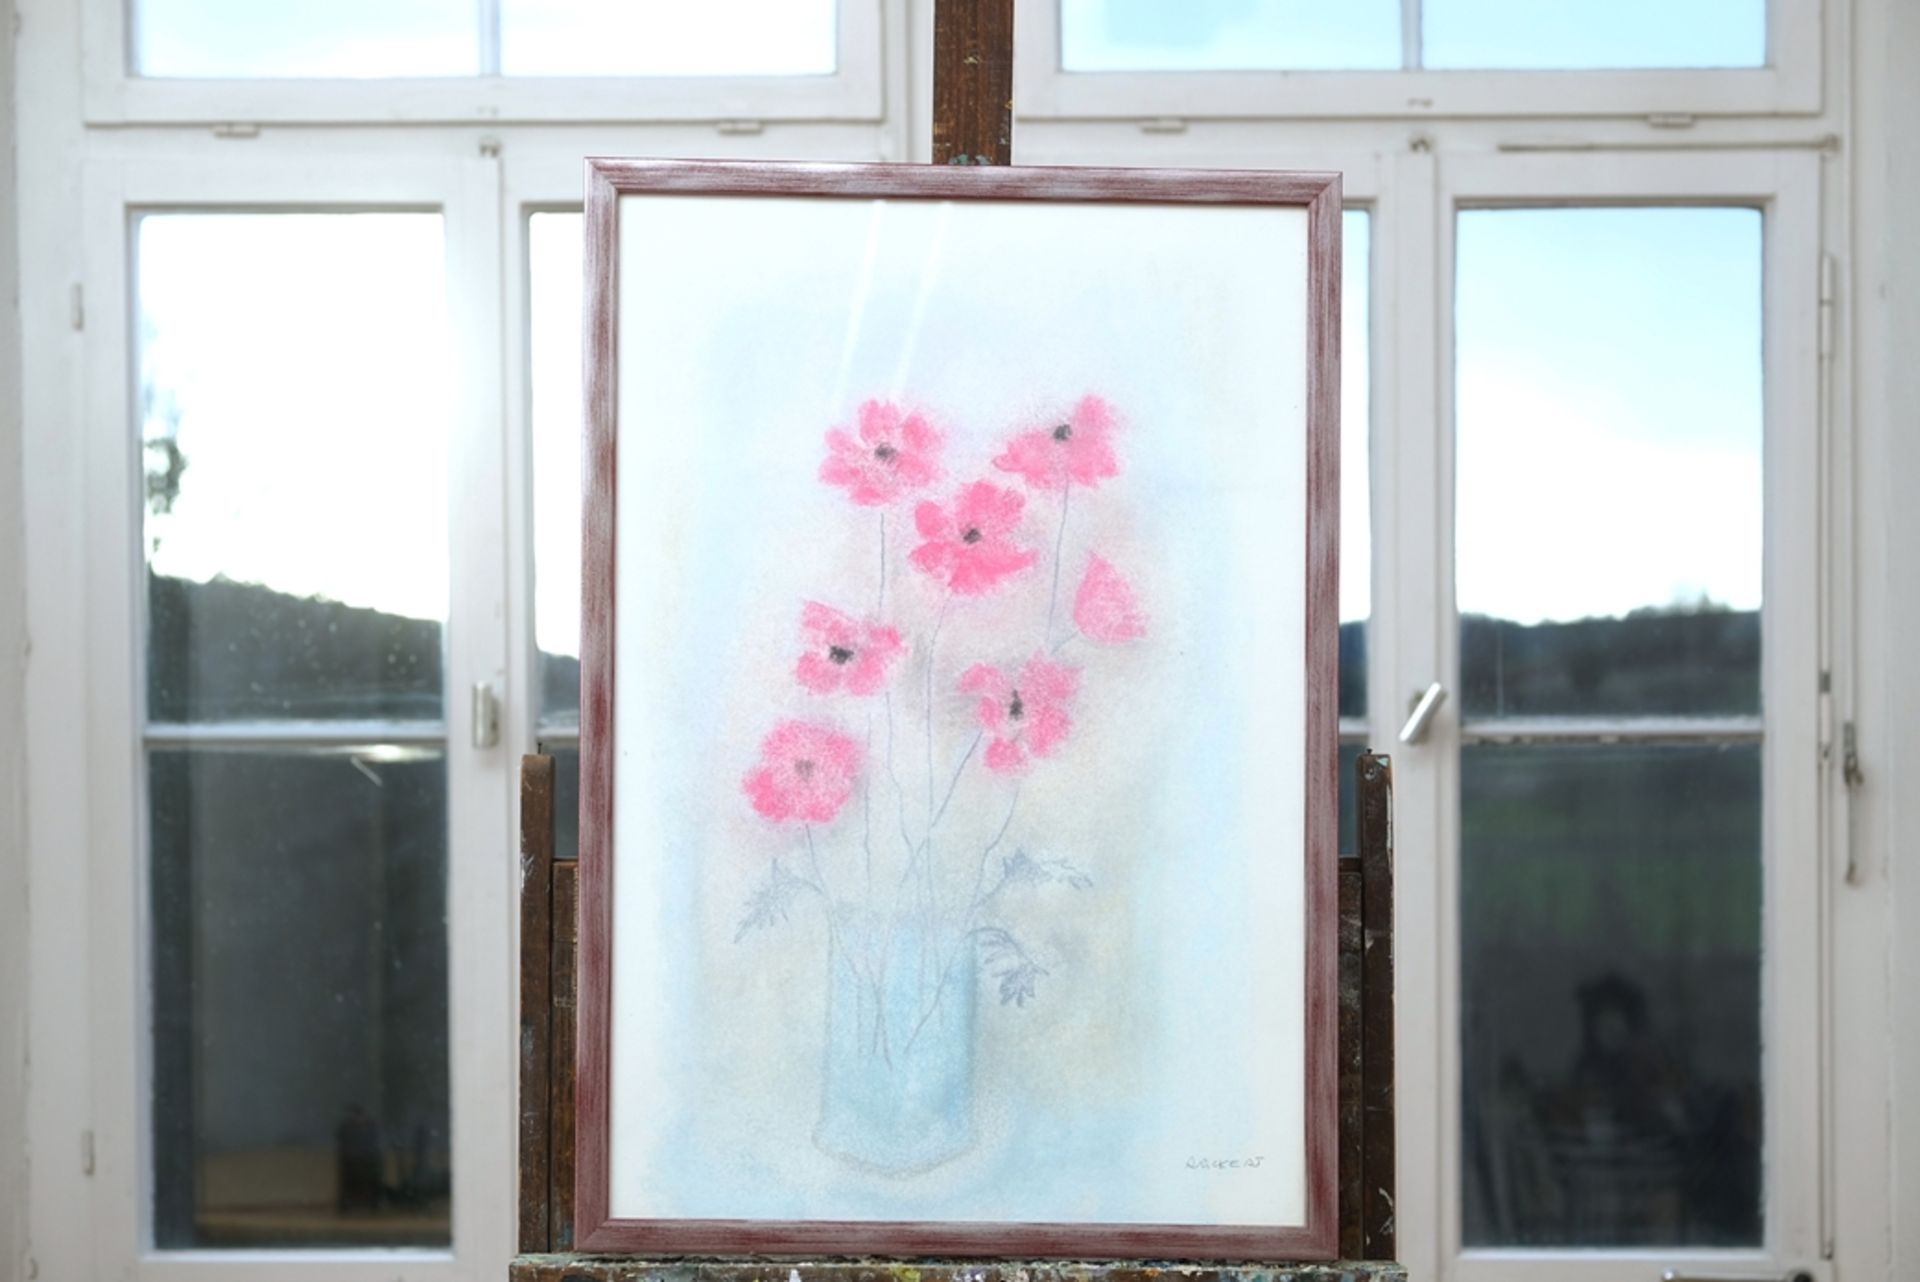 Rückert, Erich-Andreas (1920-2016) Poppies, pastel chalk on paper. - Image 2 of 4